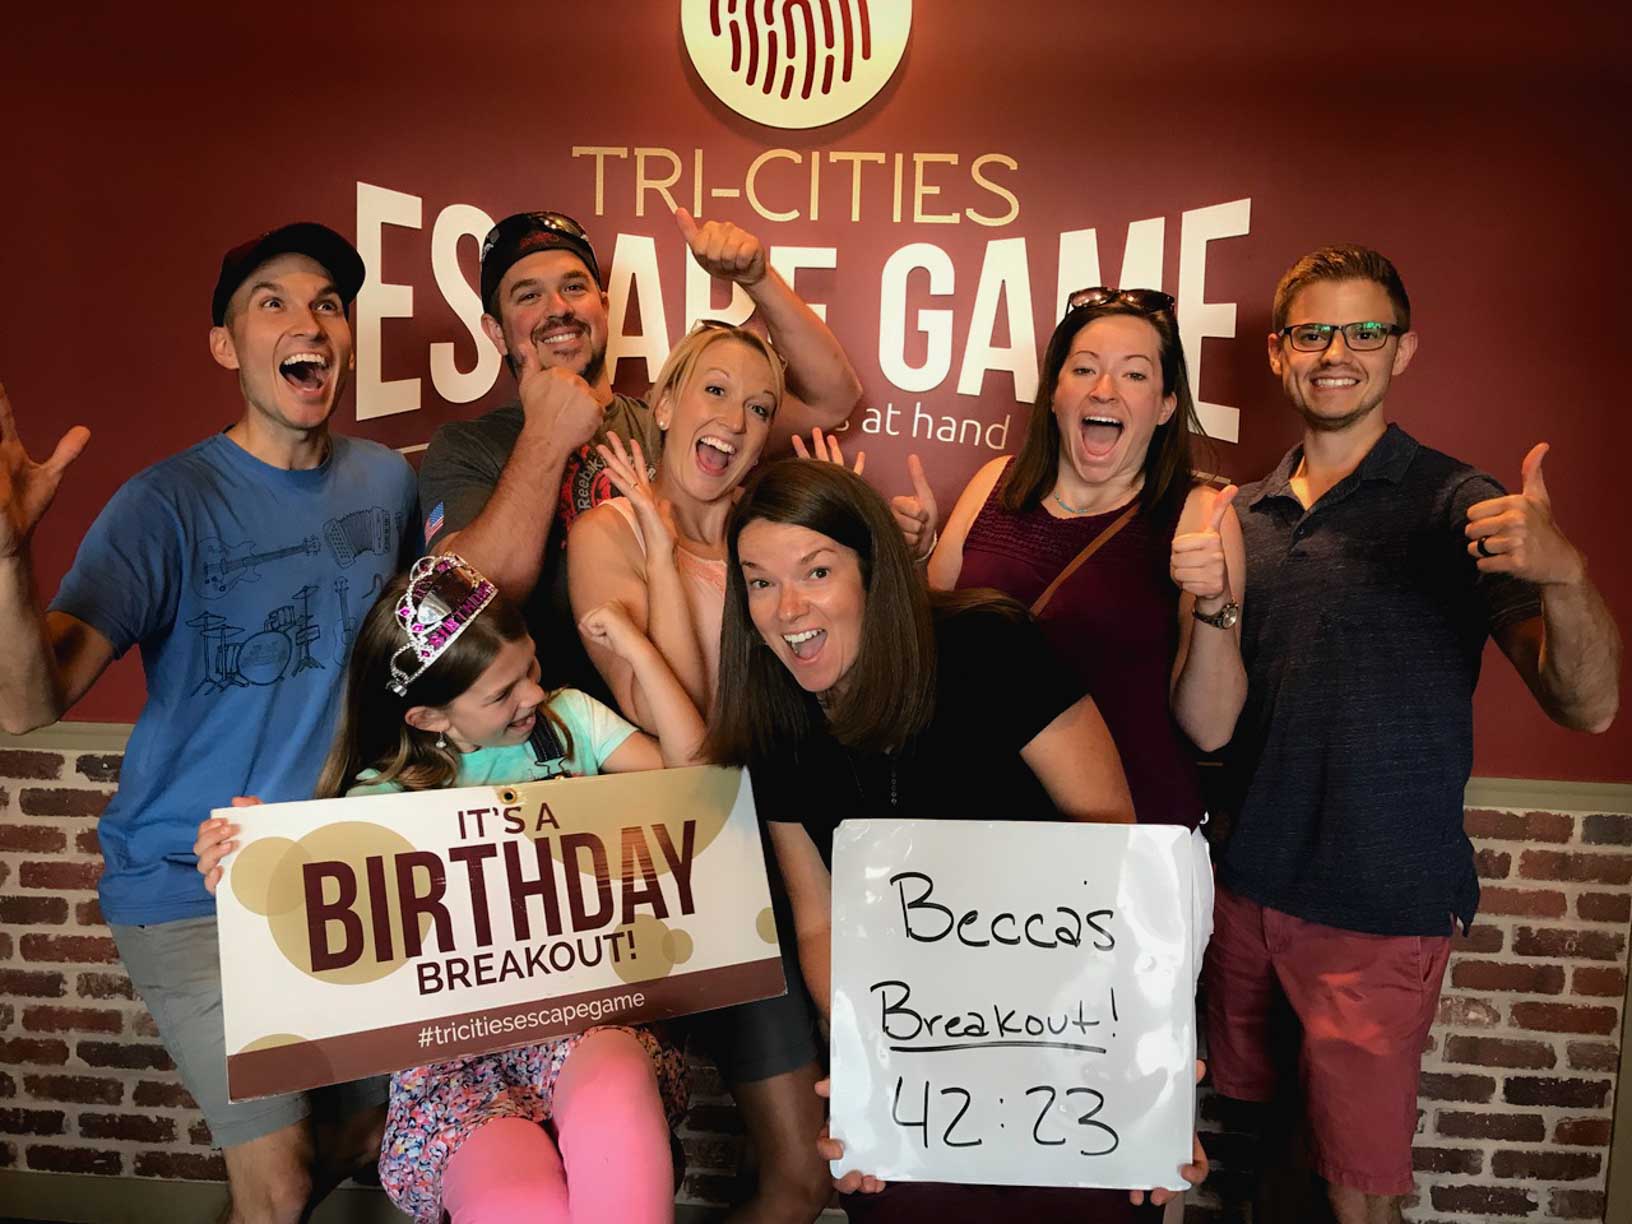 Celebrate your birthday with a Birthday Breakout!